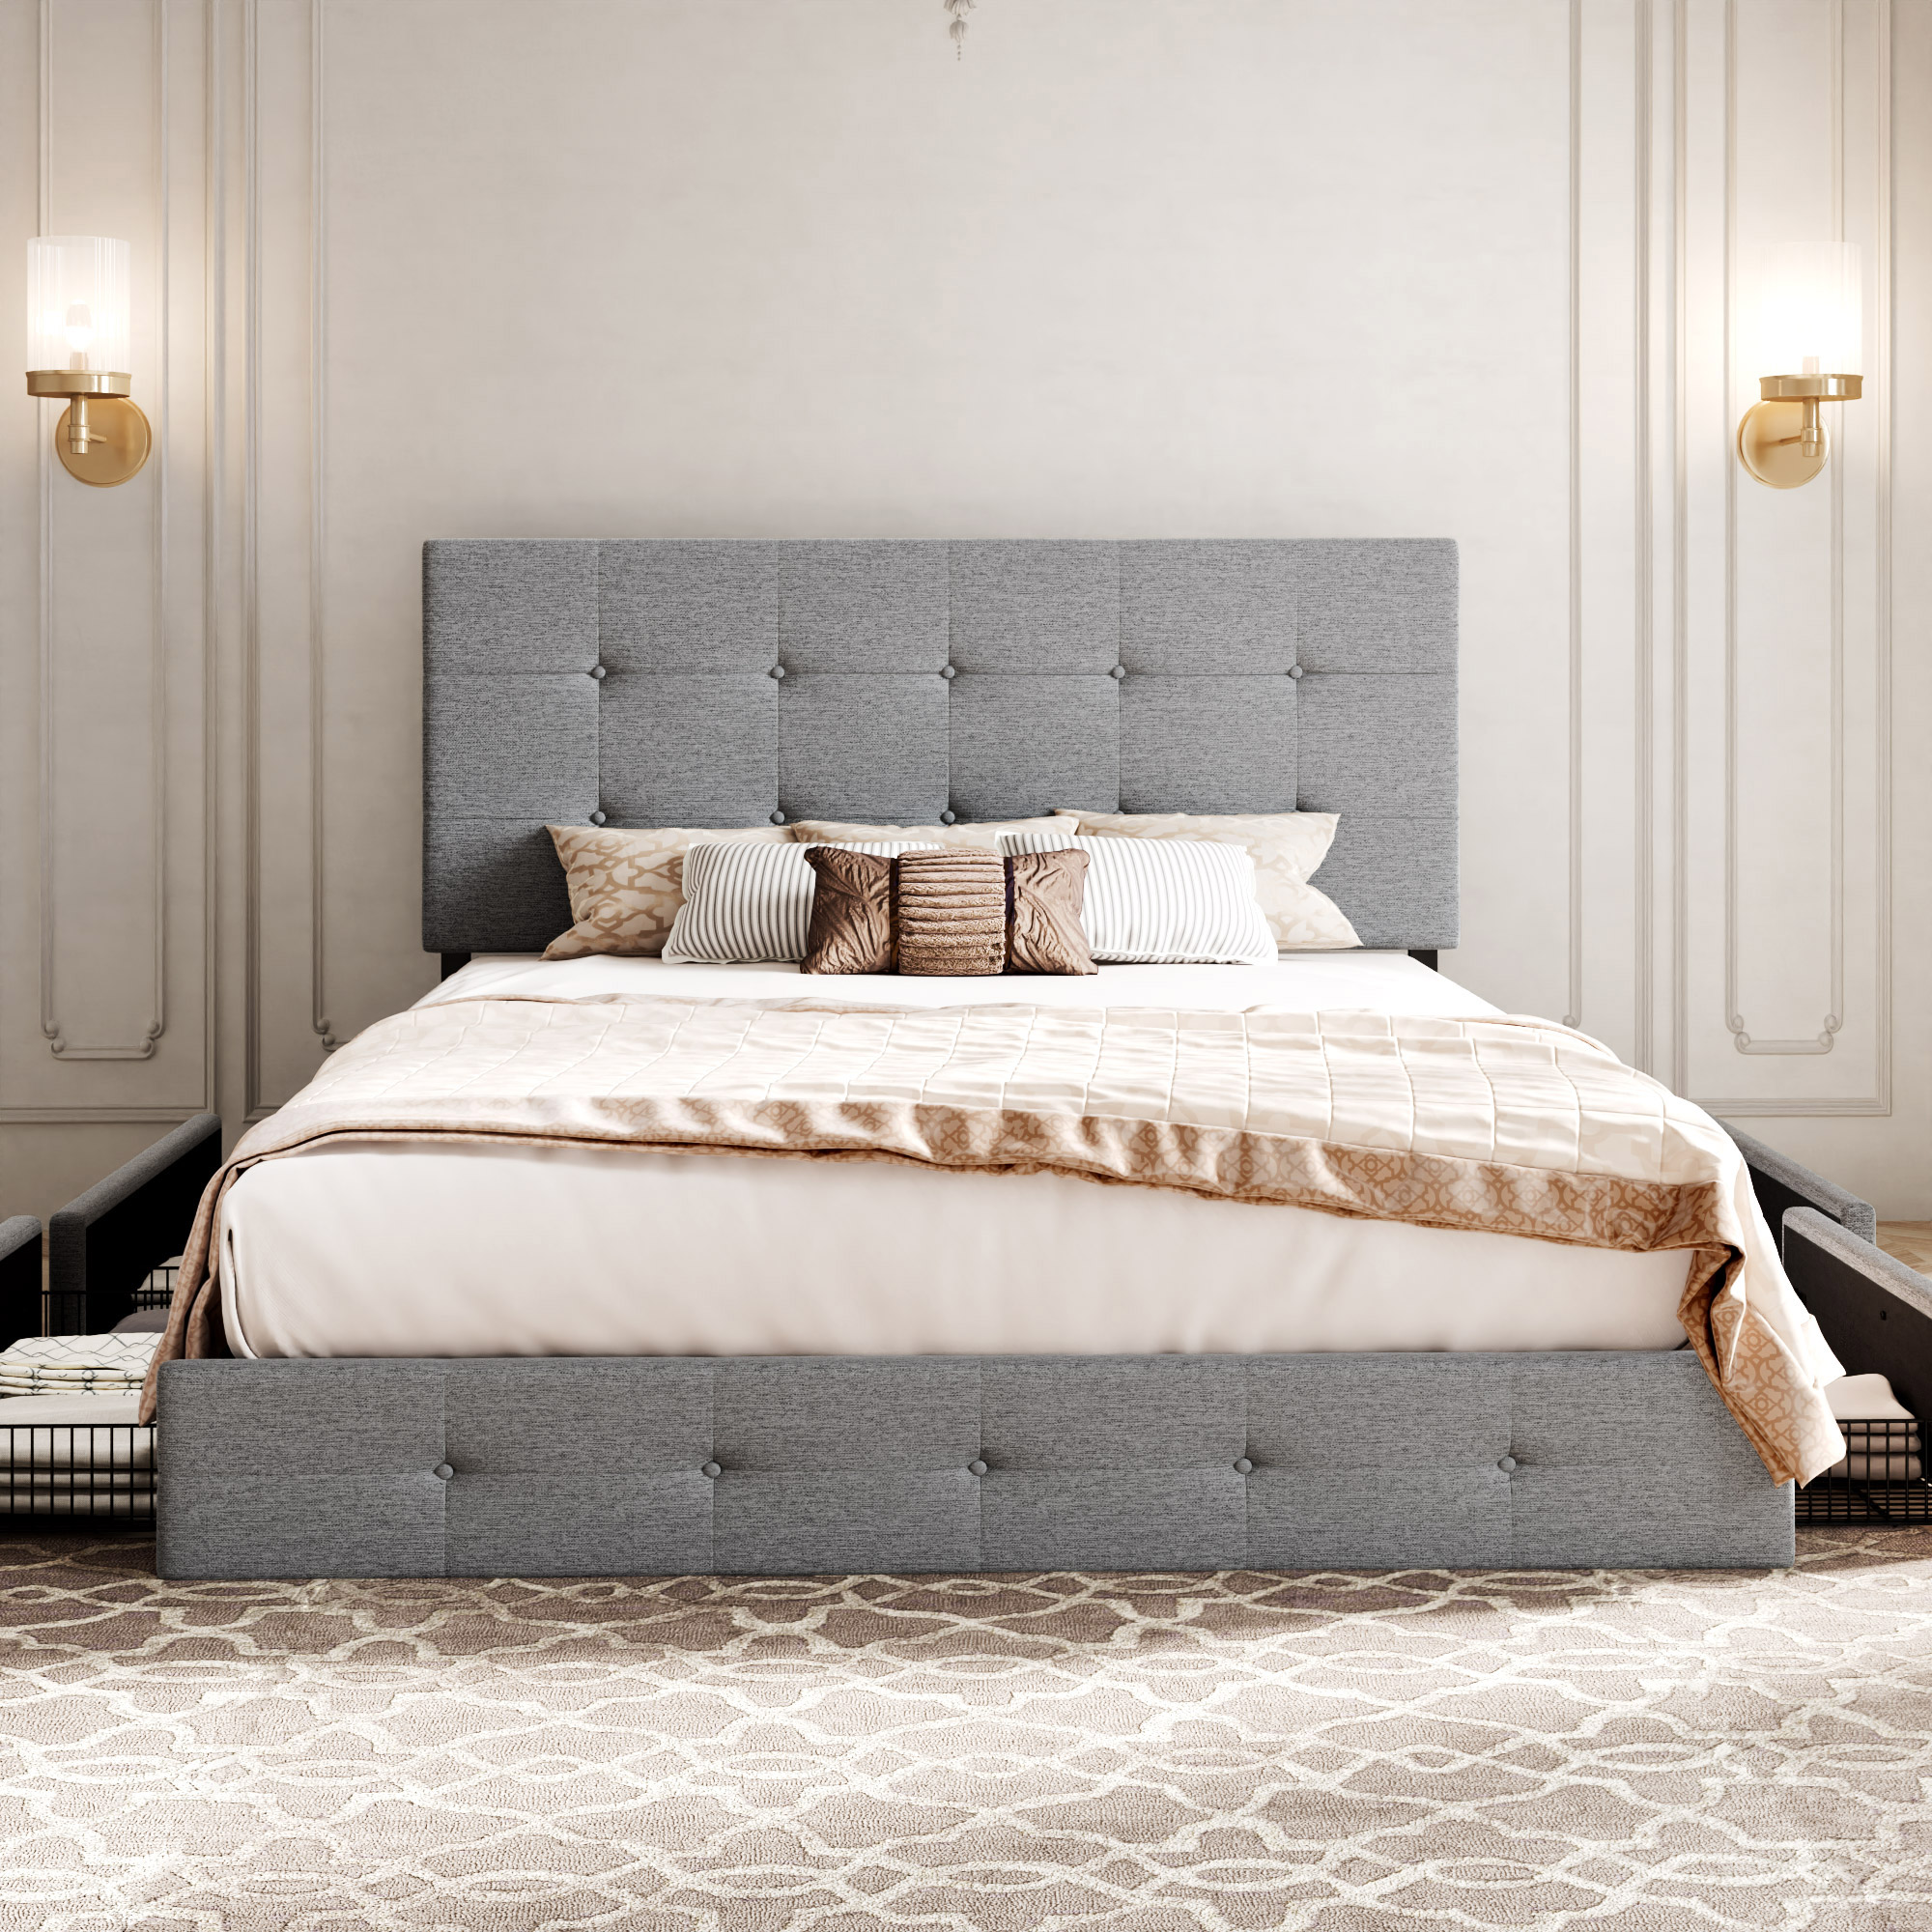 Allewie Light Grey Queen Platform Bed Frame with 4 Drawers Storage and Square Stitched Button Tufted Upholstered Headboard - image 3 of 8